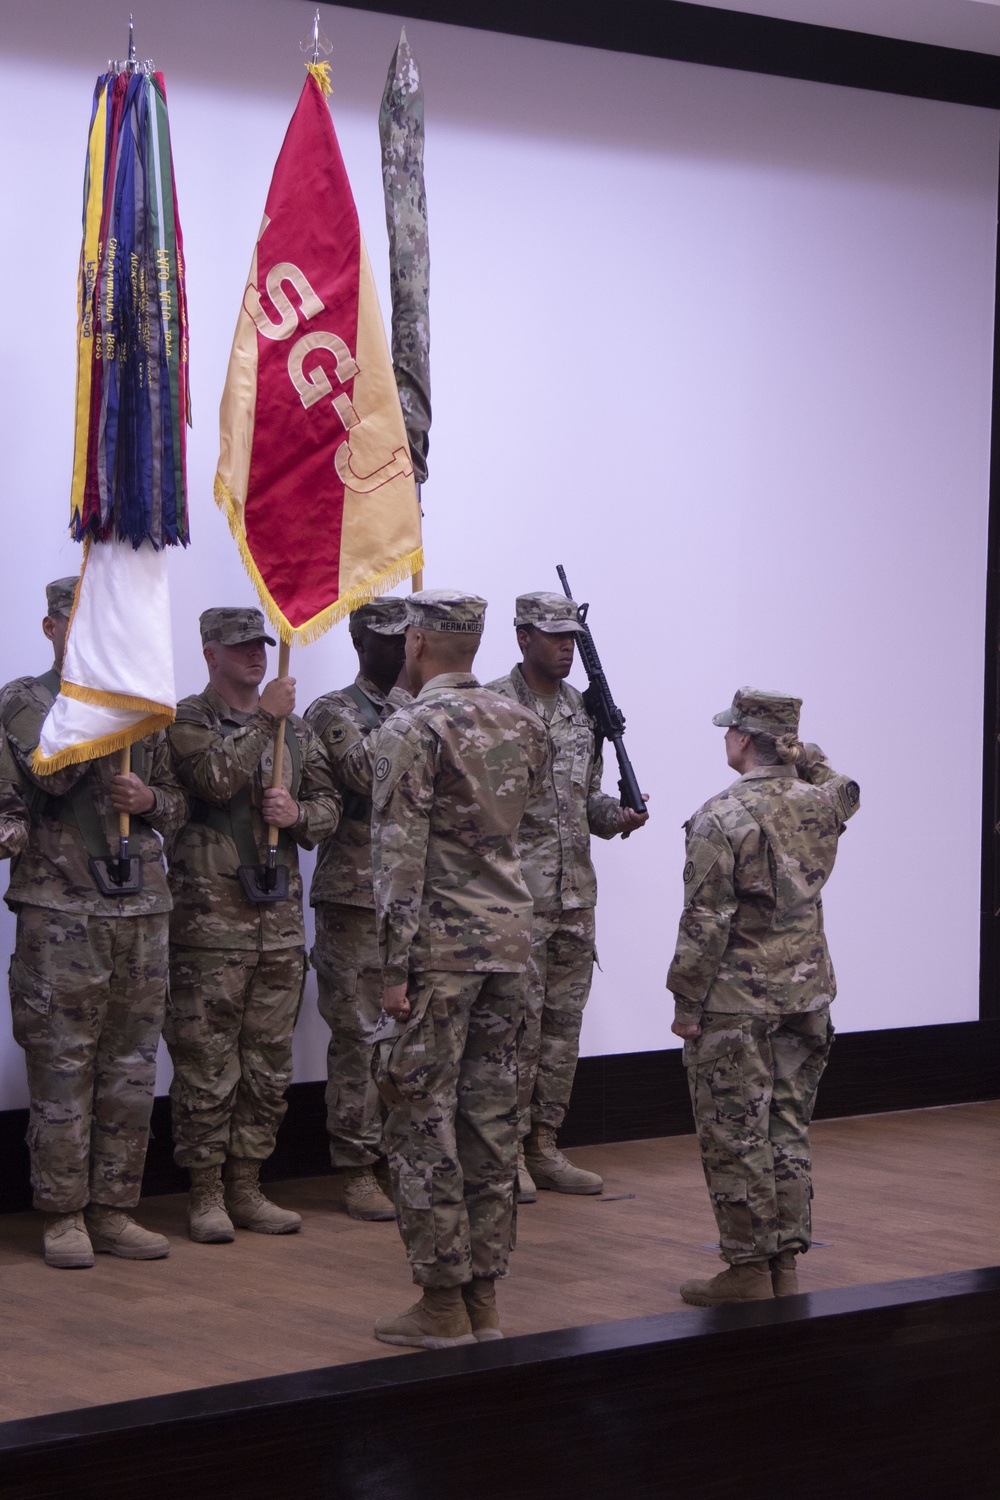 ASG-J Transitions To A New Command Team